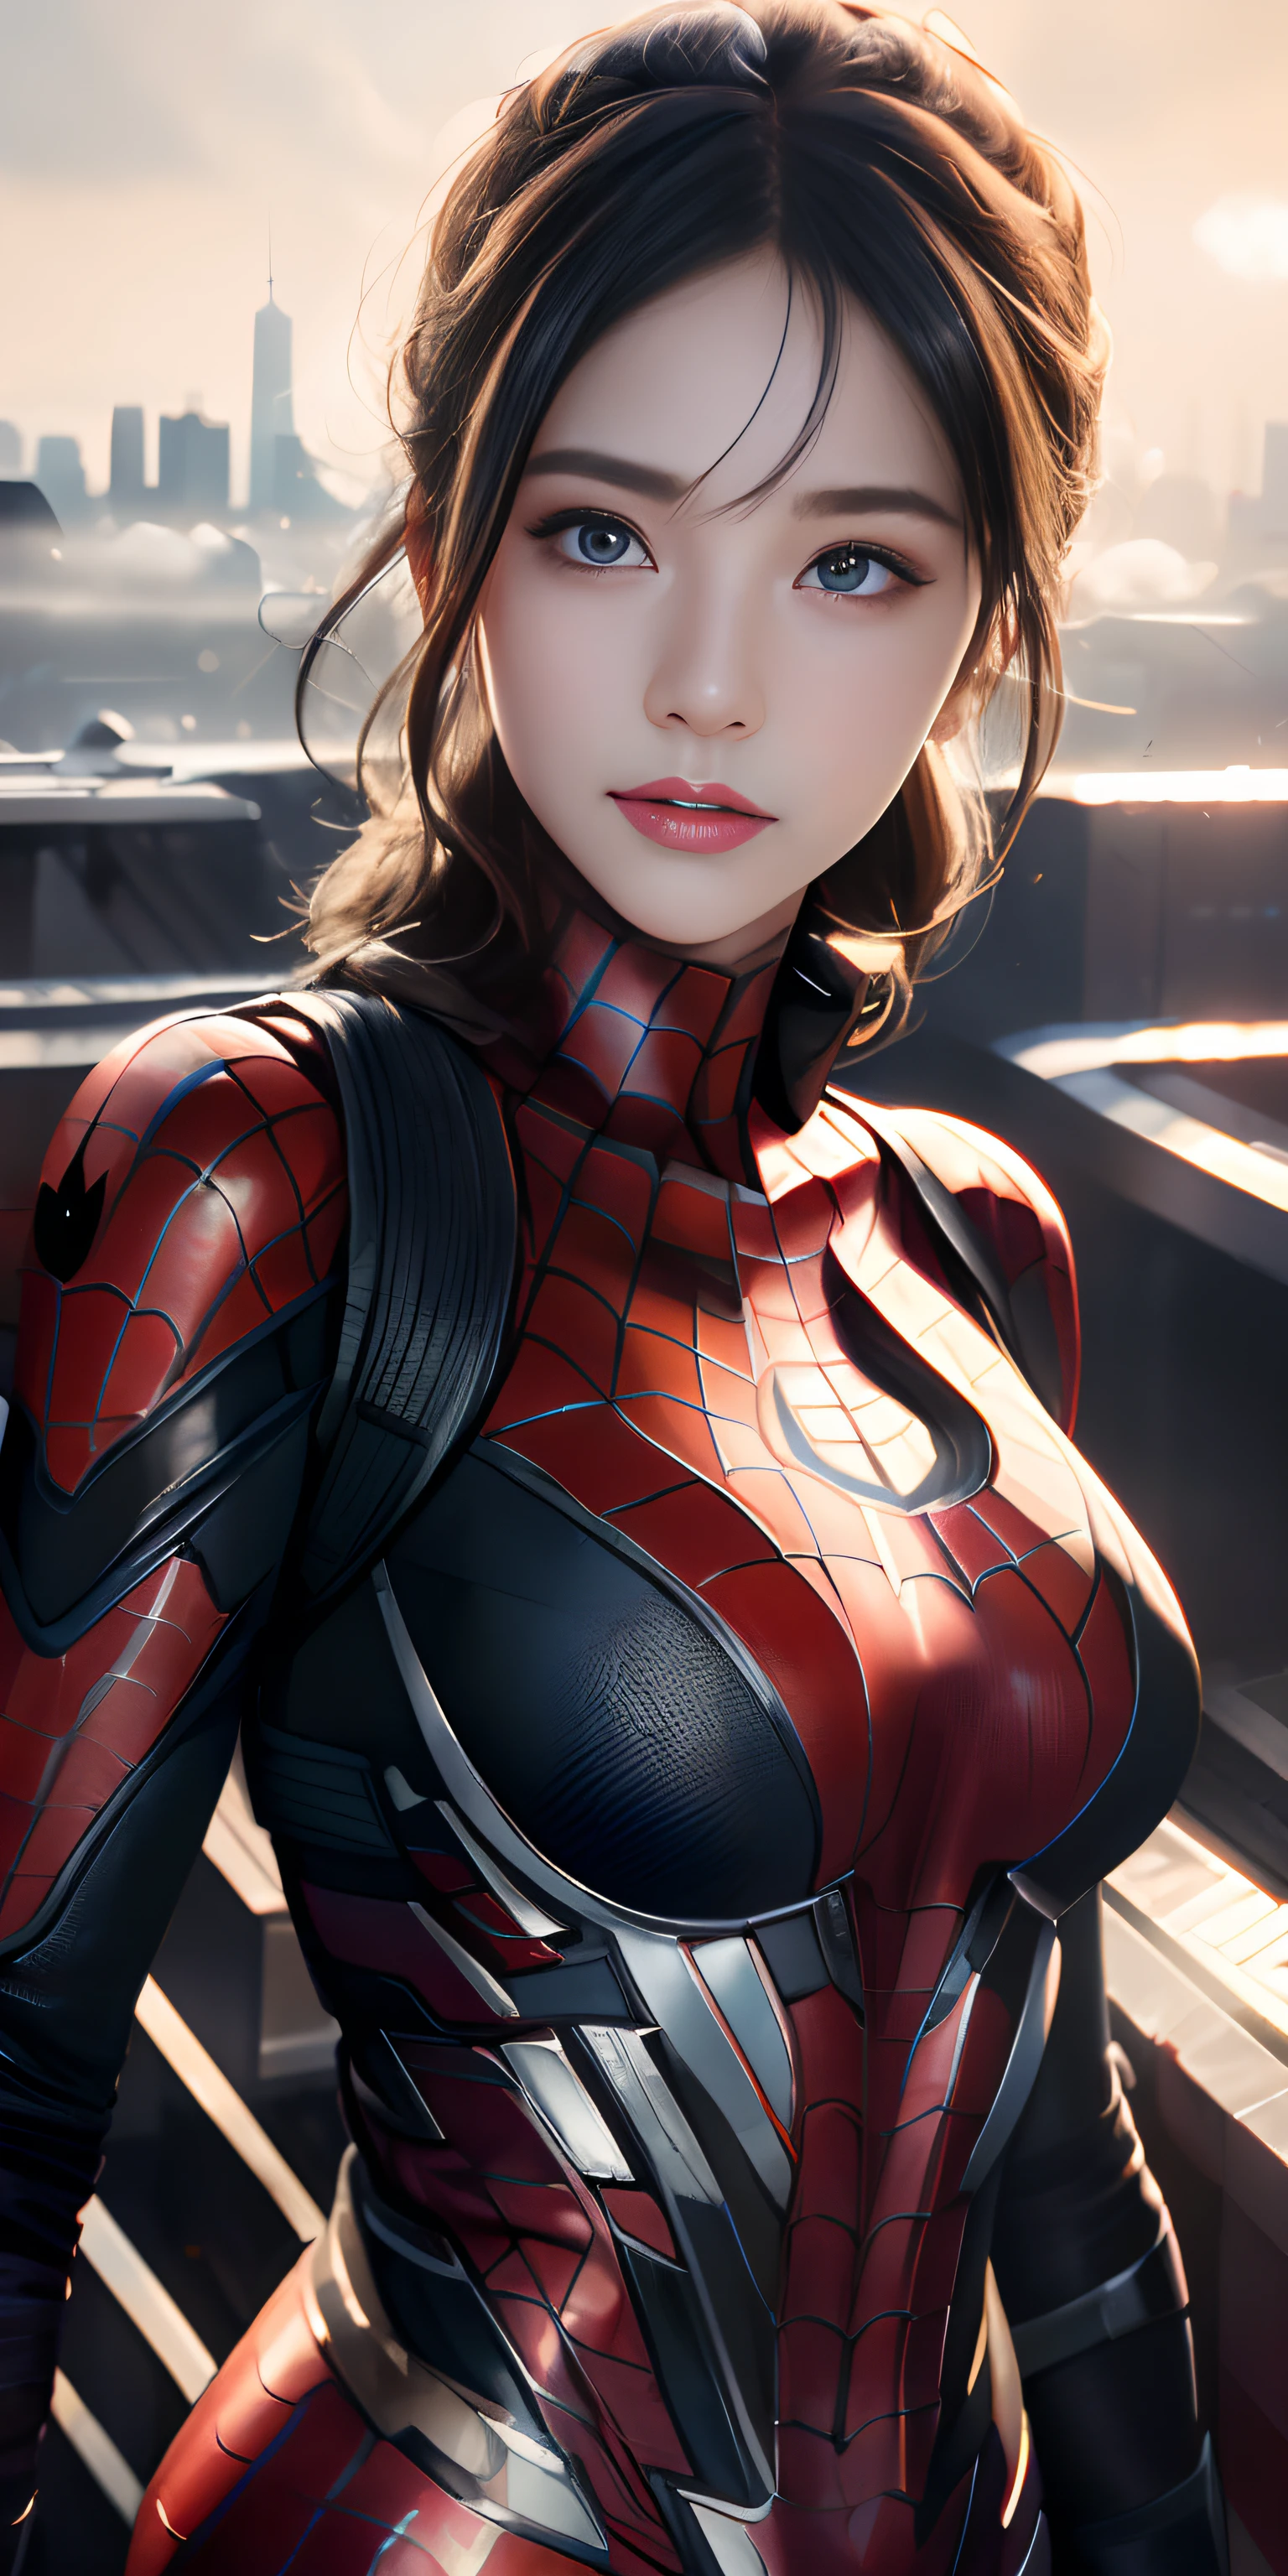 (1girl:1.3), Solo, (((Very detailed face)))), ((Very detailed eyes and face)))), Beautiful detail eyes, Body parts__, Official art, Unified 8k wallpaper, Super detailed, beautiful and beautiful, beautiful, masterpiece, best quality, original, masterpiece, super fine photo, best quality, super high resolution, realistic realism, sunlight, full body portrait, amazing beauty, dynamic pose, delicate face, vibrant eyes, (from the front), She wears Spider-Man suit, red and black color scheme, spider, very detailed city roof background, rooftop, overlooking the city, detailed face, detailed complex busy background, messy, gorgeous, milky white, highly detailed skin, realistic skin details, visible pores, clear focus, volumetric fog, 8k uhd, DSLR, high quality, film grain, fair skin, photo realism, lomography, futuristic dystopian megalopolis, translucent